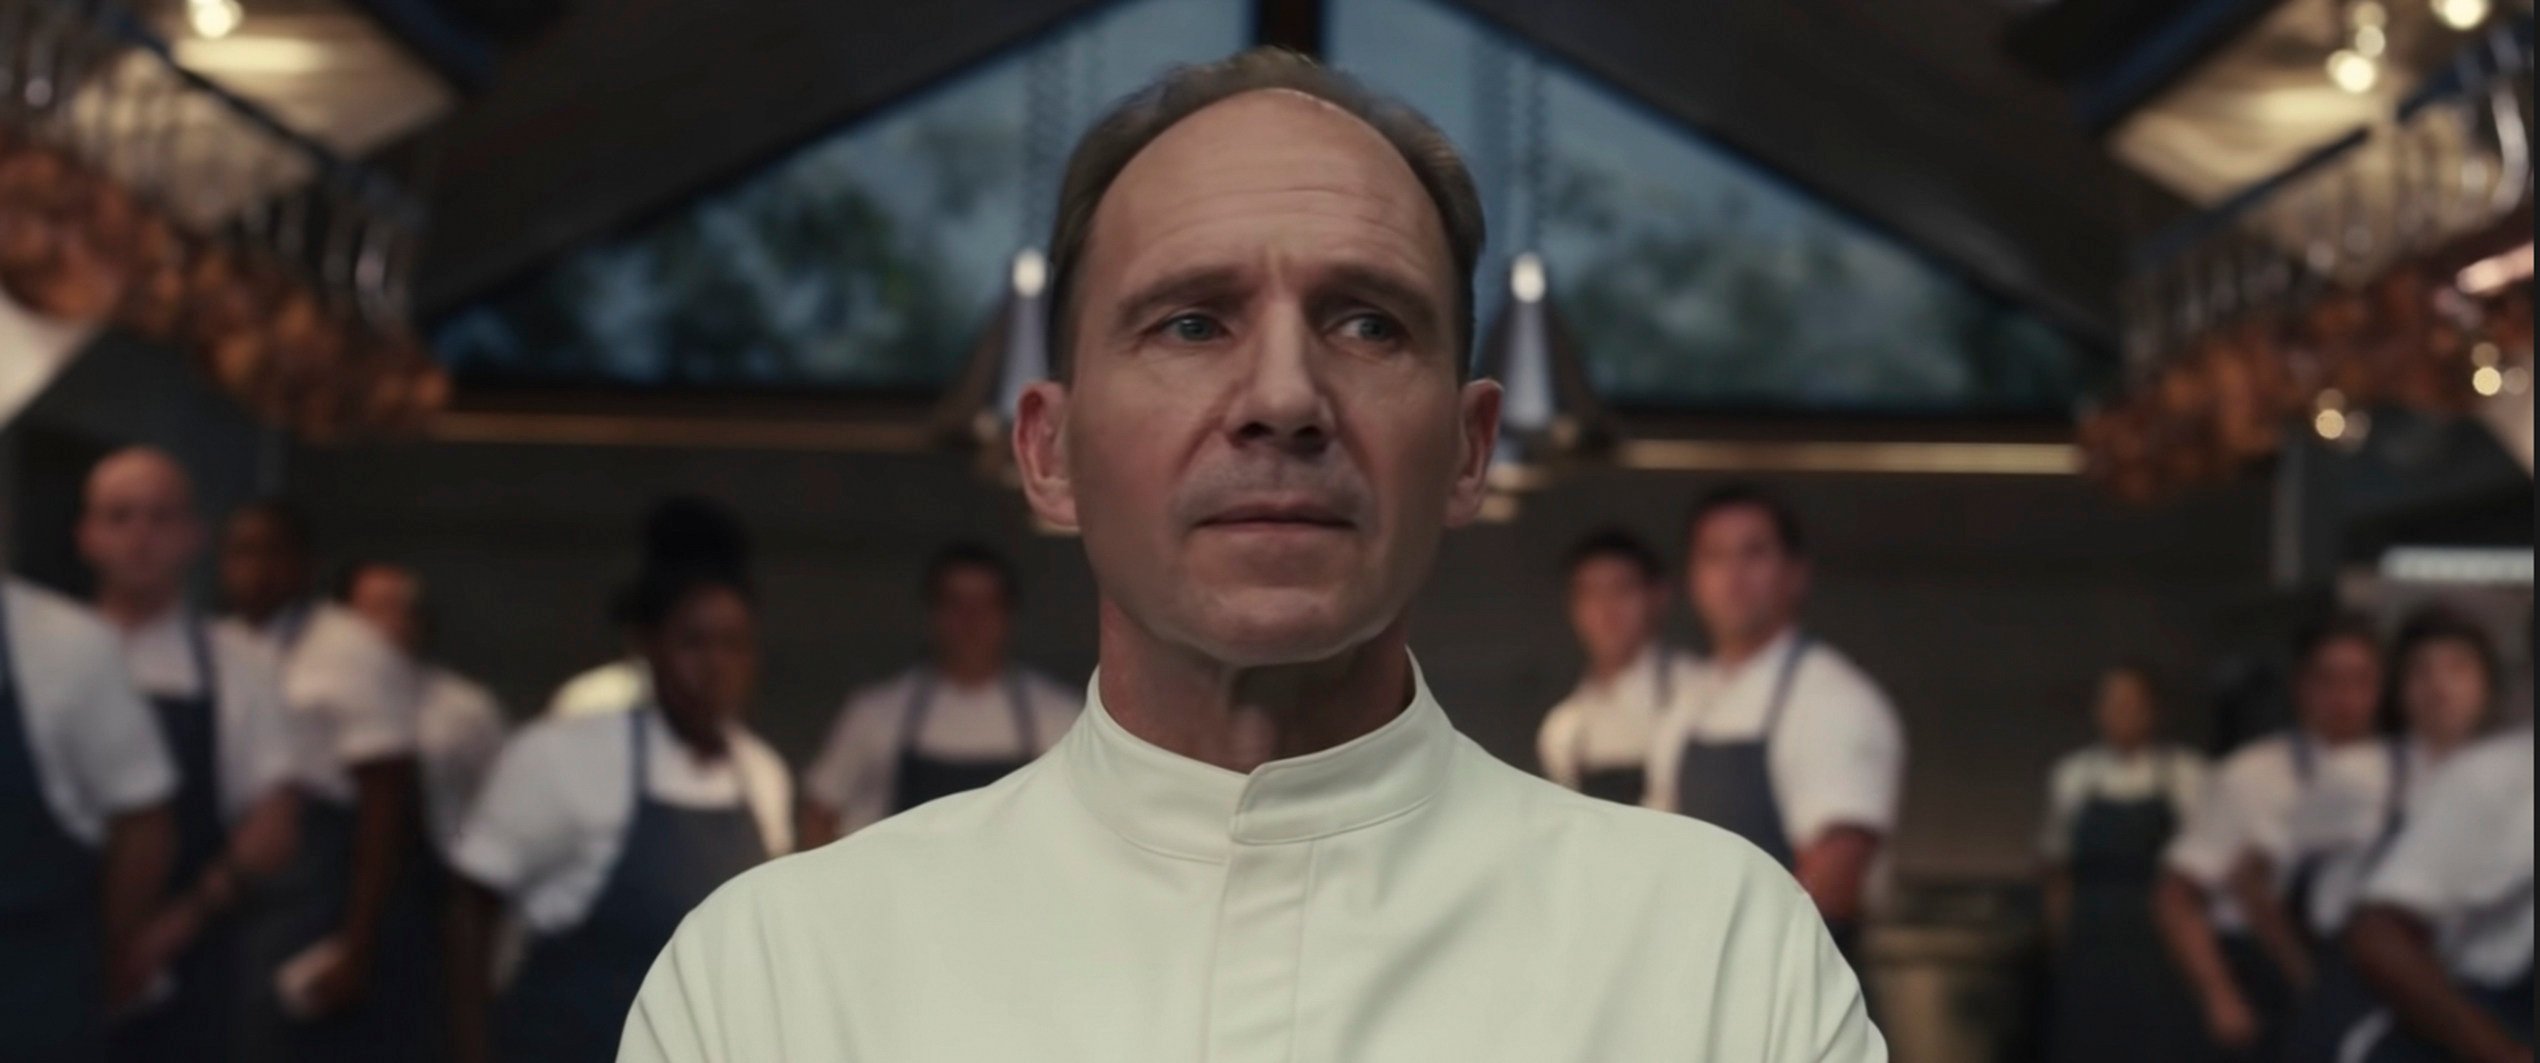 Ralph Fiennes plays the emotionless executive chef of a high-end restaurant in The Menu, a horror-comedy film co-starring Anya Taylor-Joy and Nicholas Hoult due for release in November. Photo: YouTube